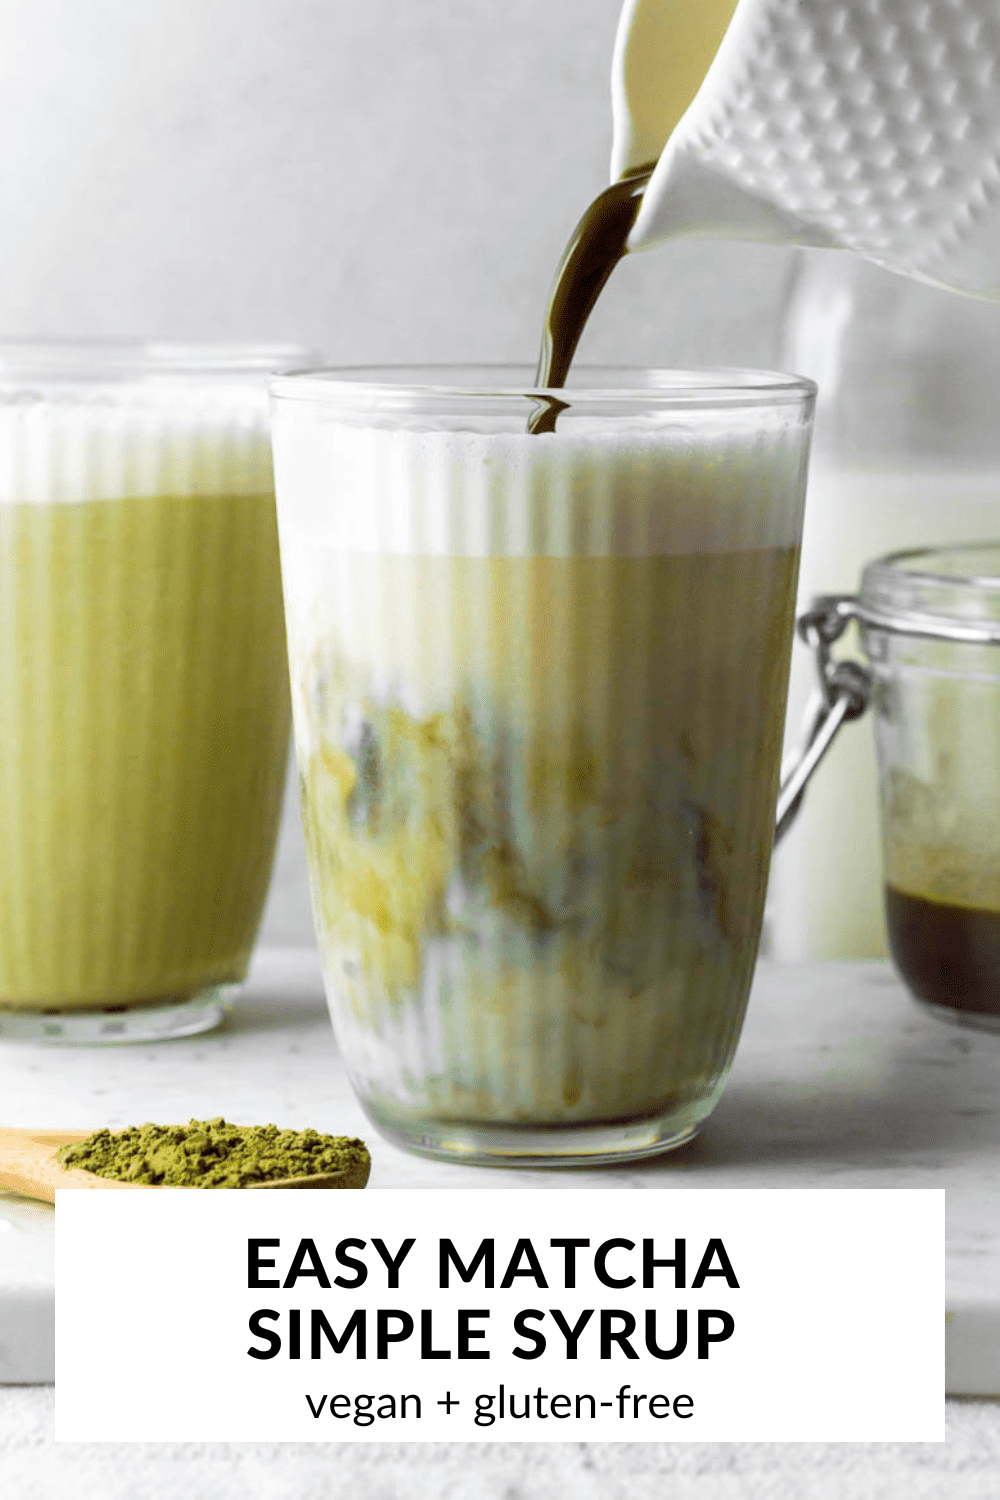 A photo of matcha latte with text overlay "Easy matcha simple syrup".